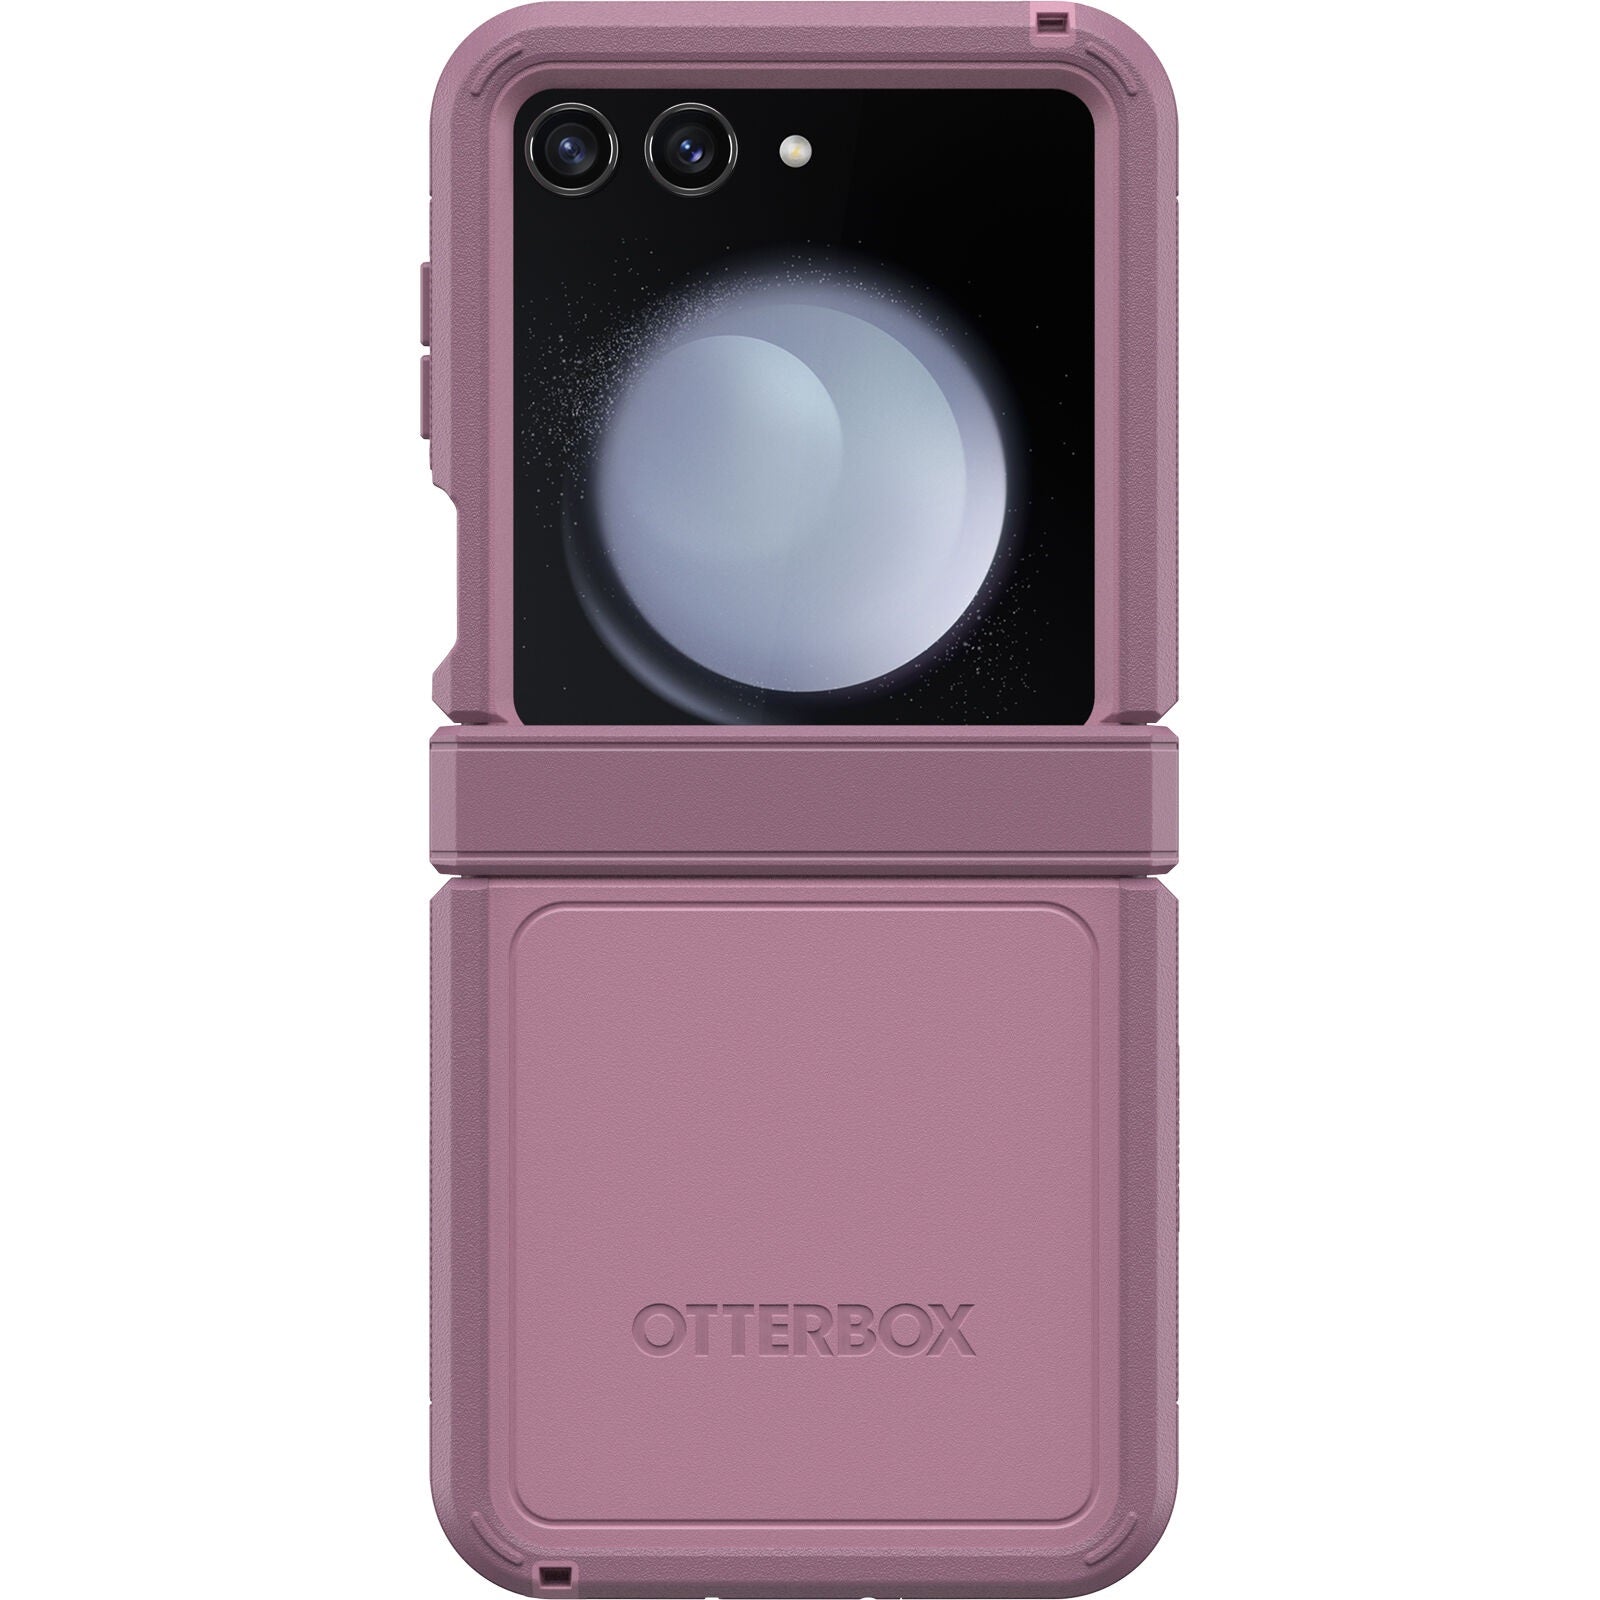 OtterBox Defender XT Samsung Galaxy Z Flip5 5G (6.7') Case Mulberry Muse (Pink) - (77-94066), DROP+ 4X Military Standard, Rugged Hinge Protection